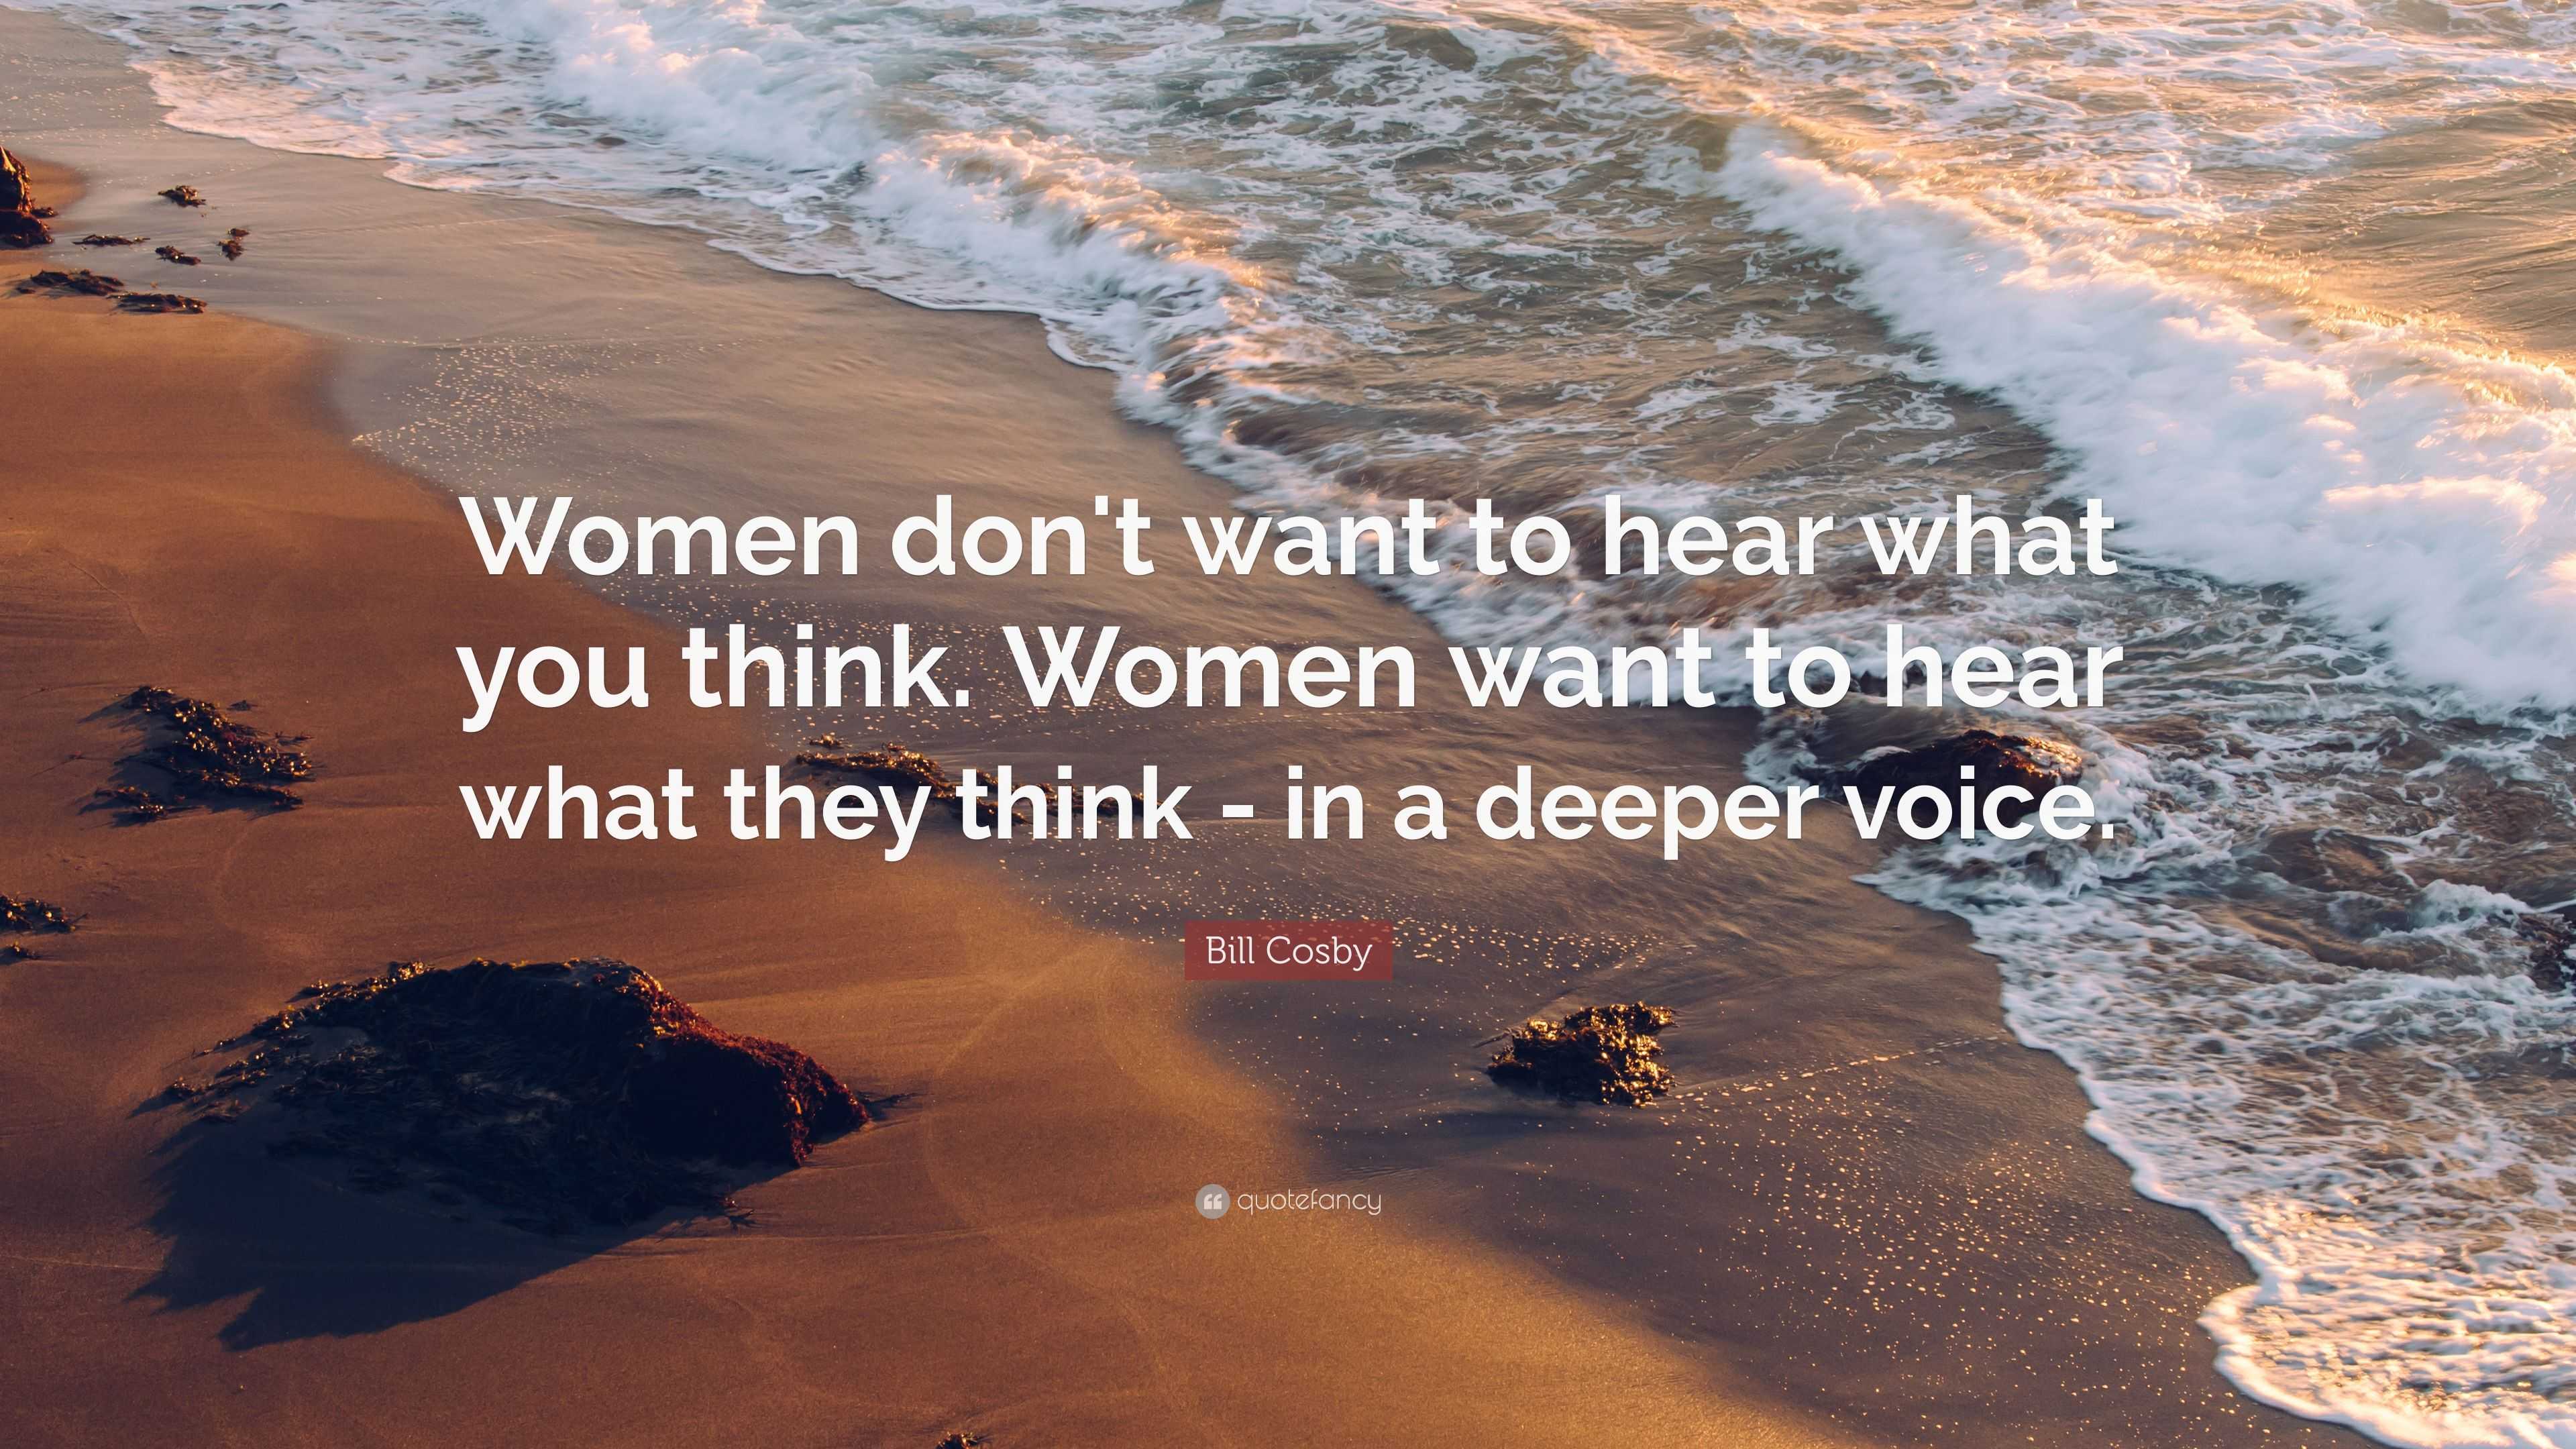 Bill Cosby Quote: “Women don't want to hear what you think. Women want ...